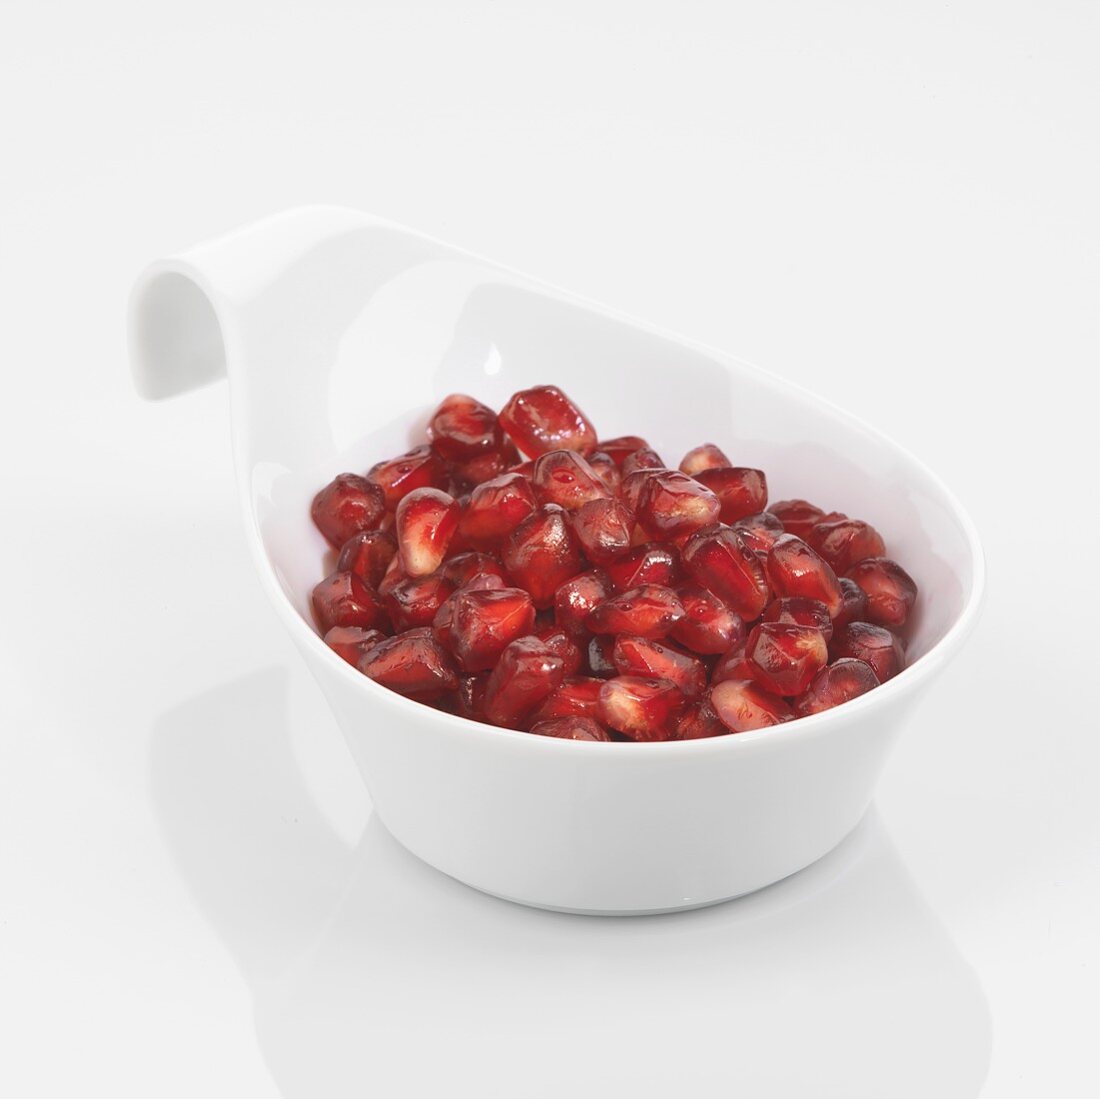 Pomegranate seeds in white dish